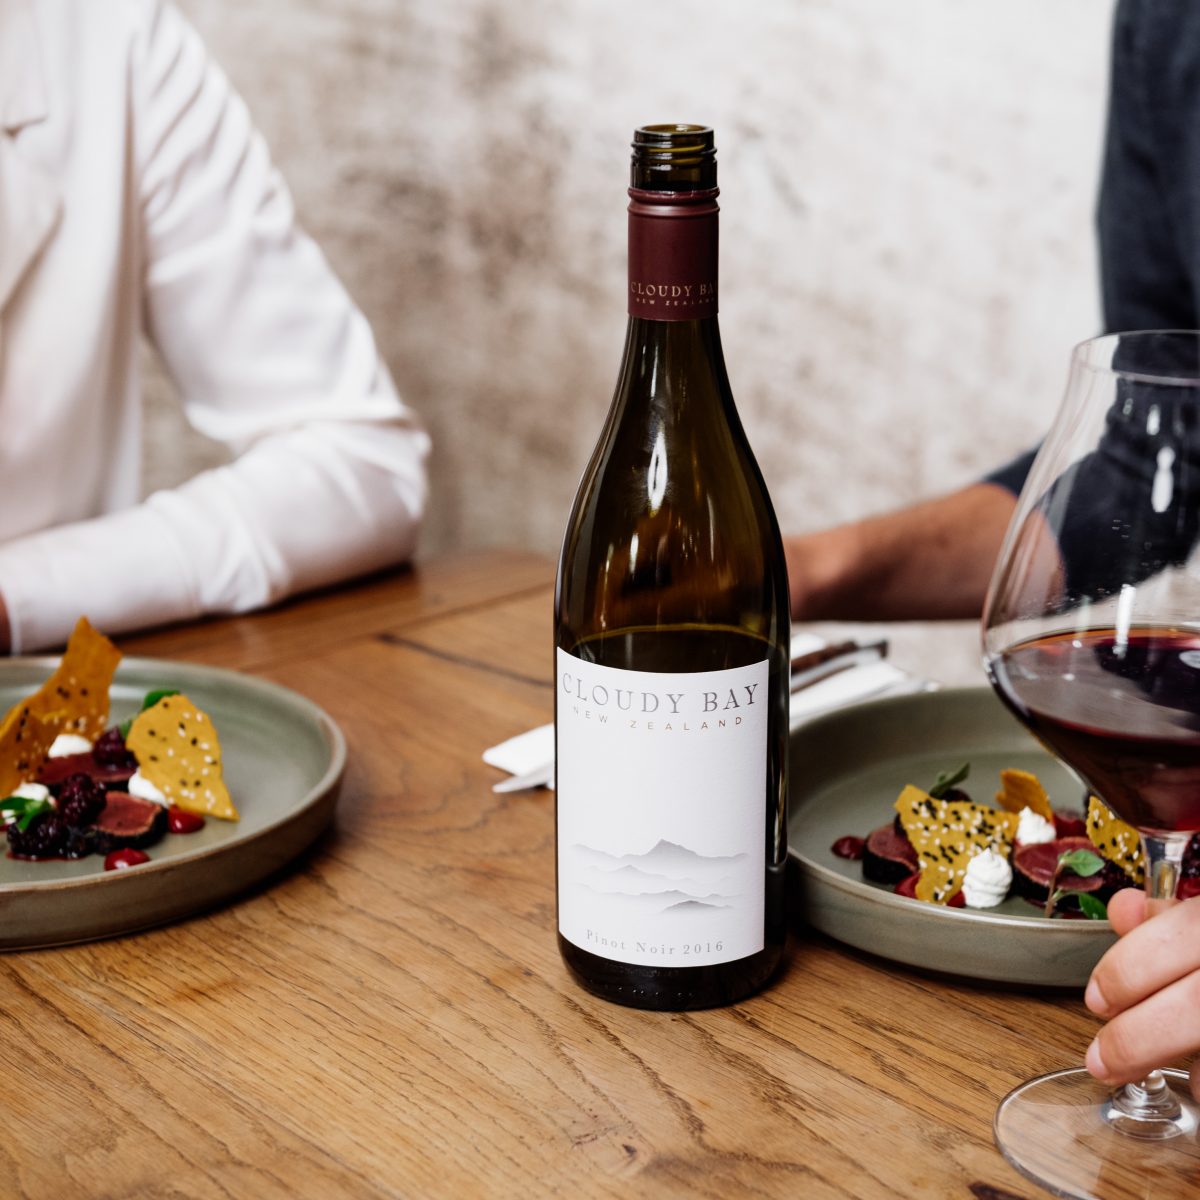 CLOUDY BAY  Cloudy Bay Wine Dinner at Ruby Jack's to be held on June 30th